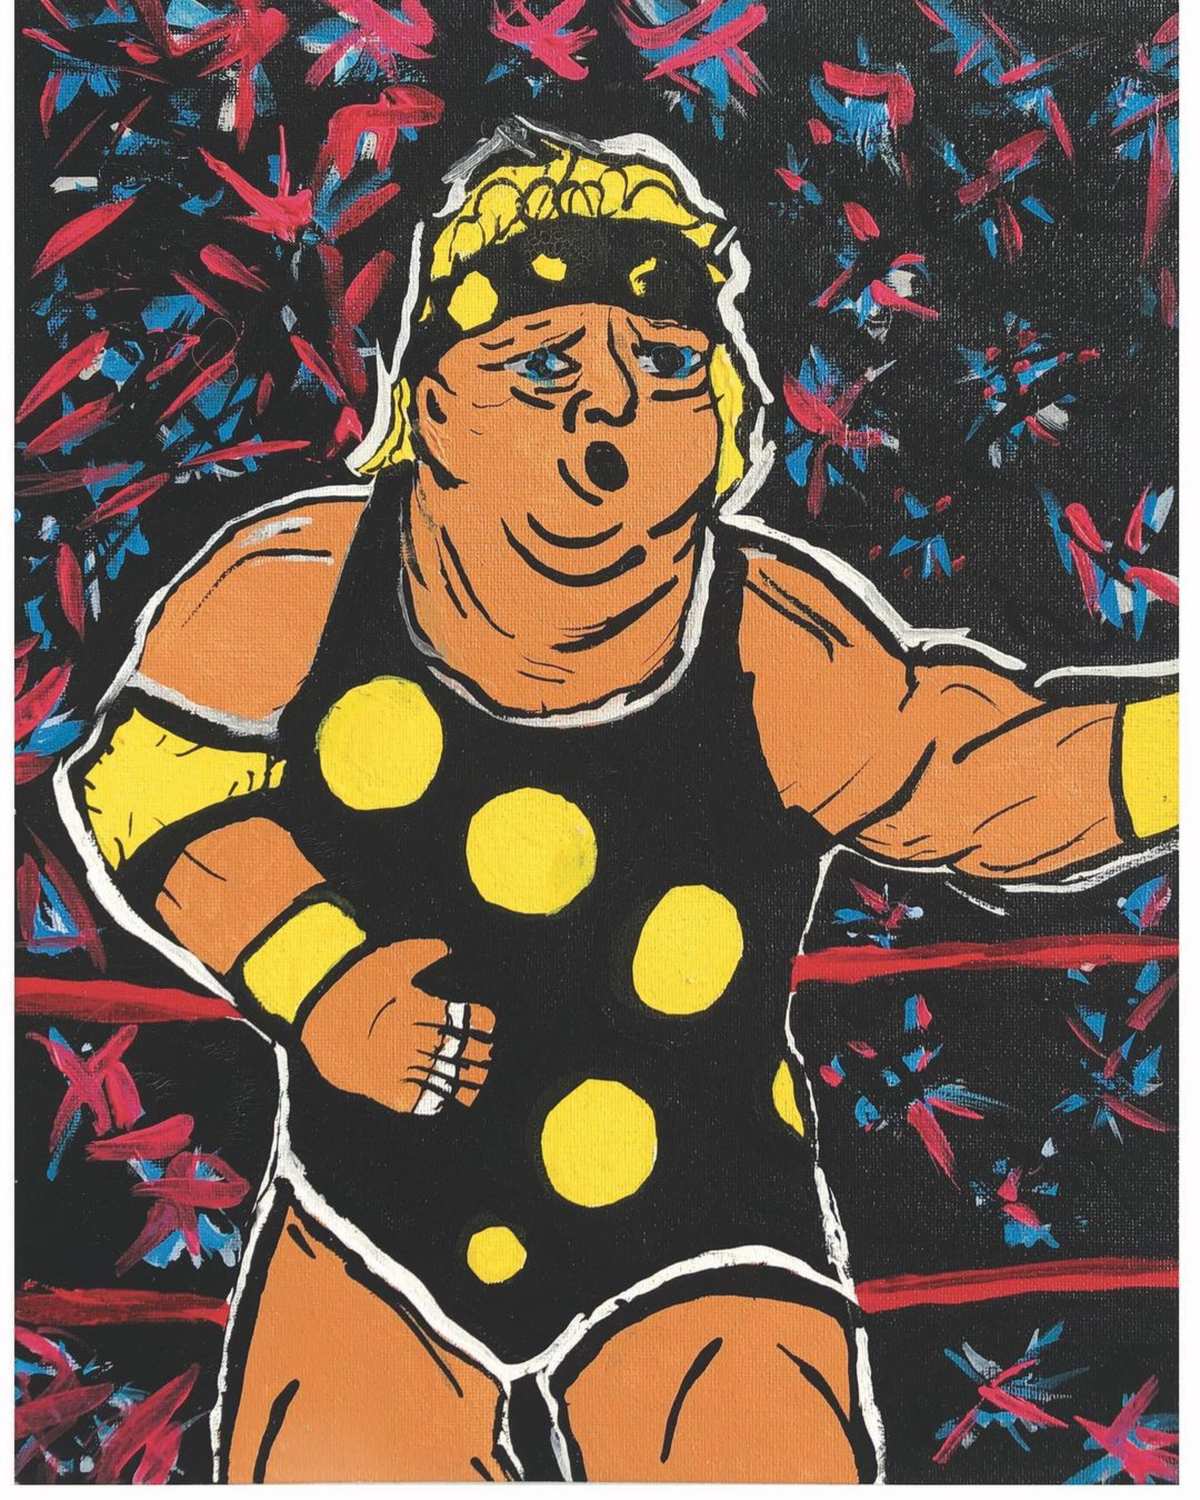 a painting of a wrestler with polka dots